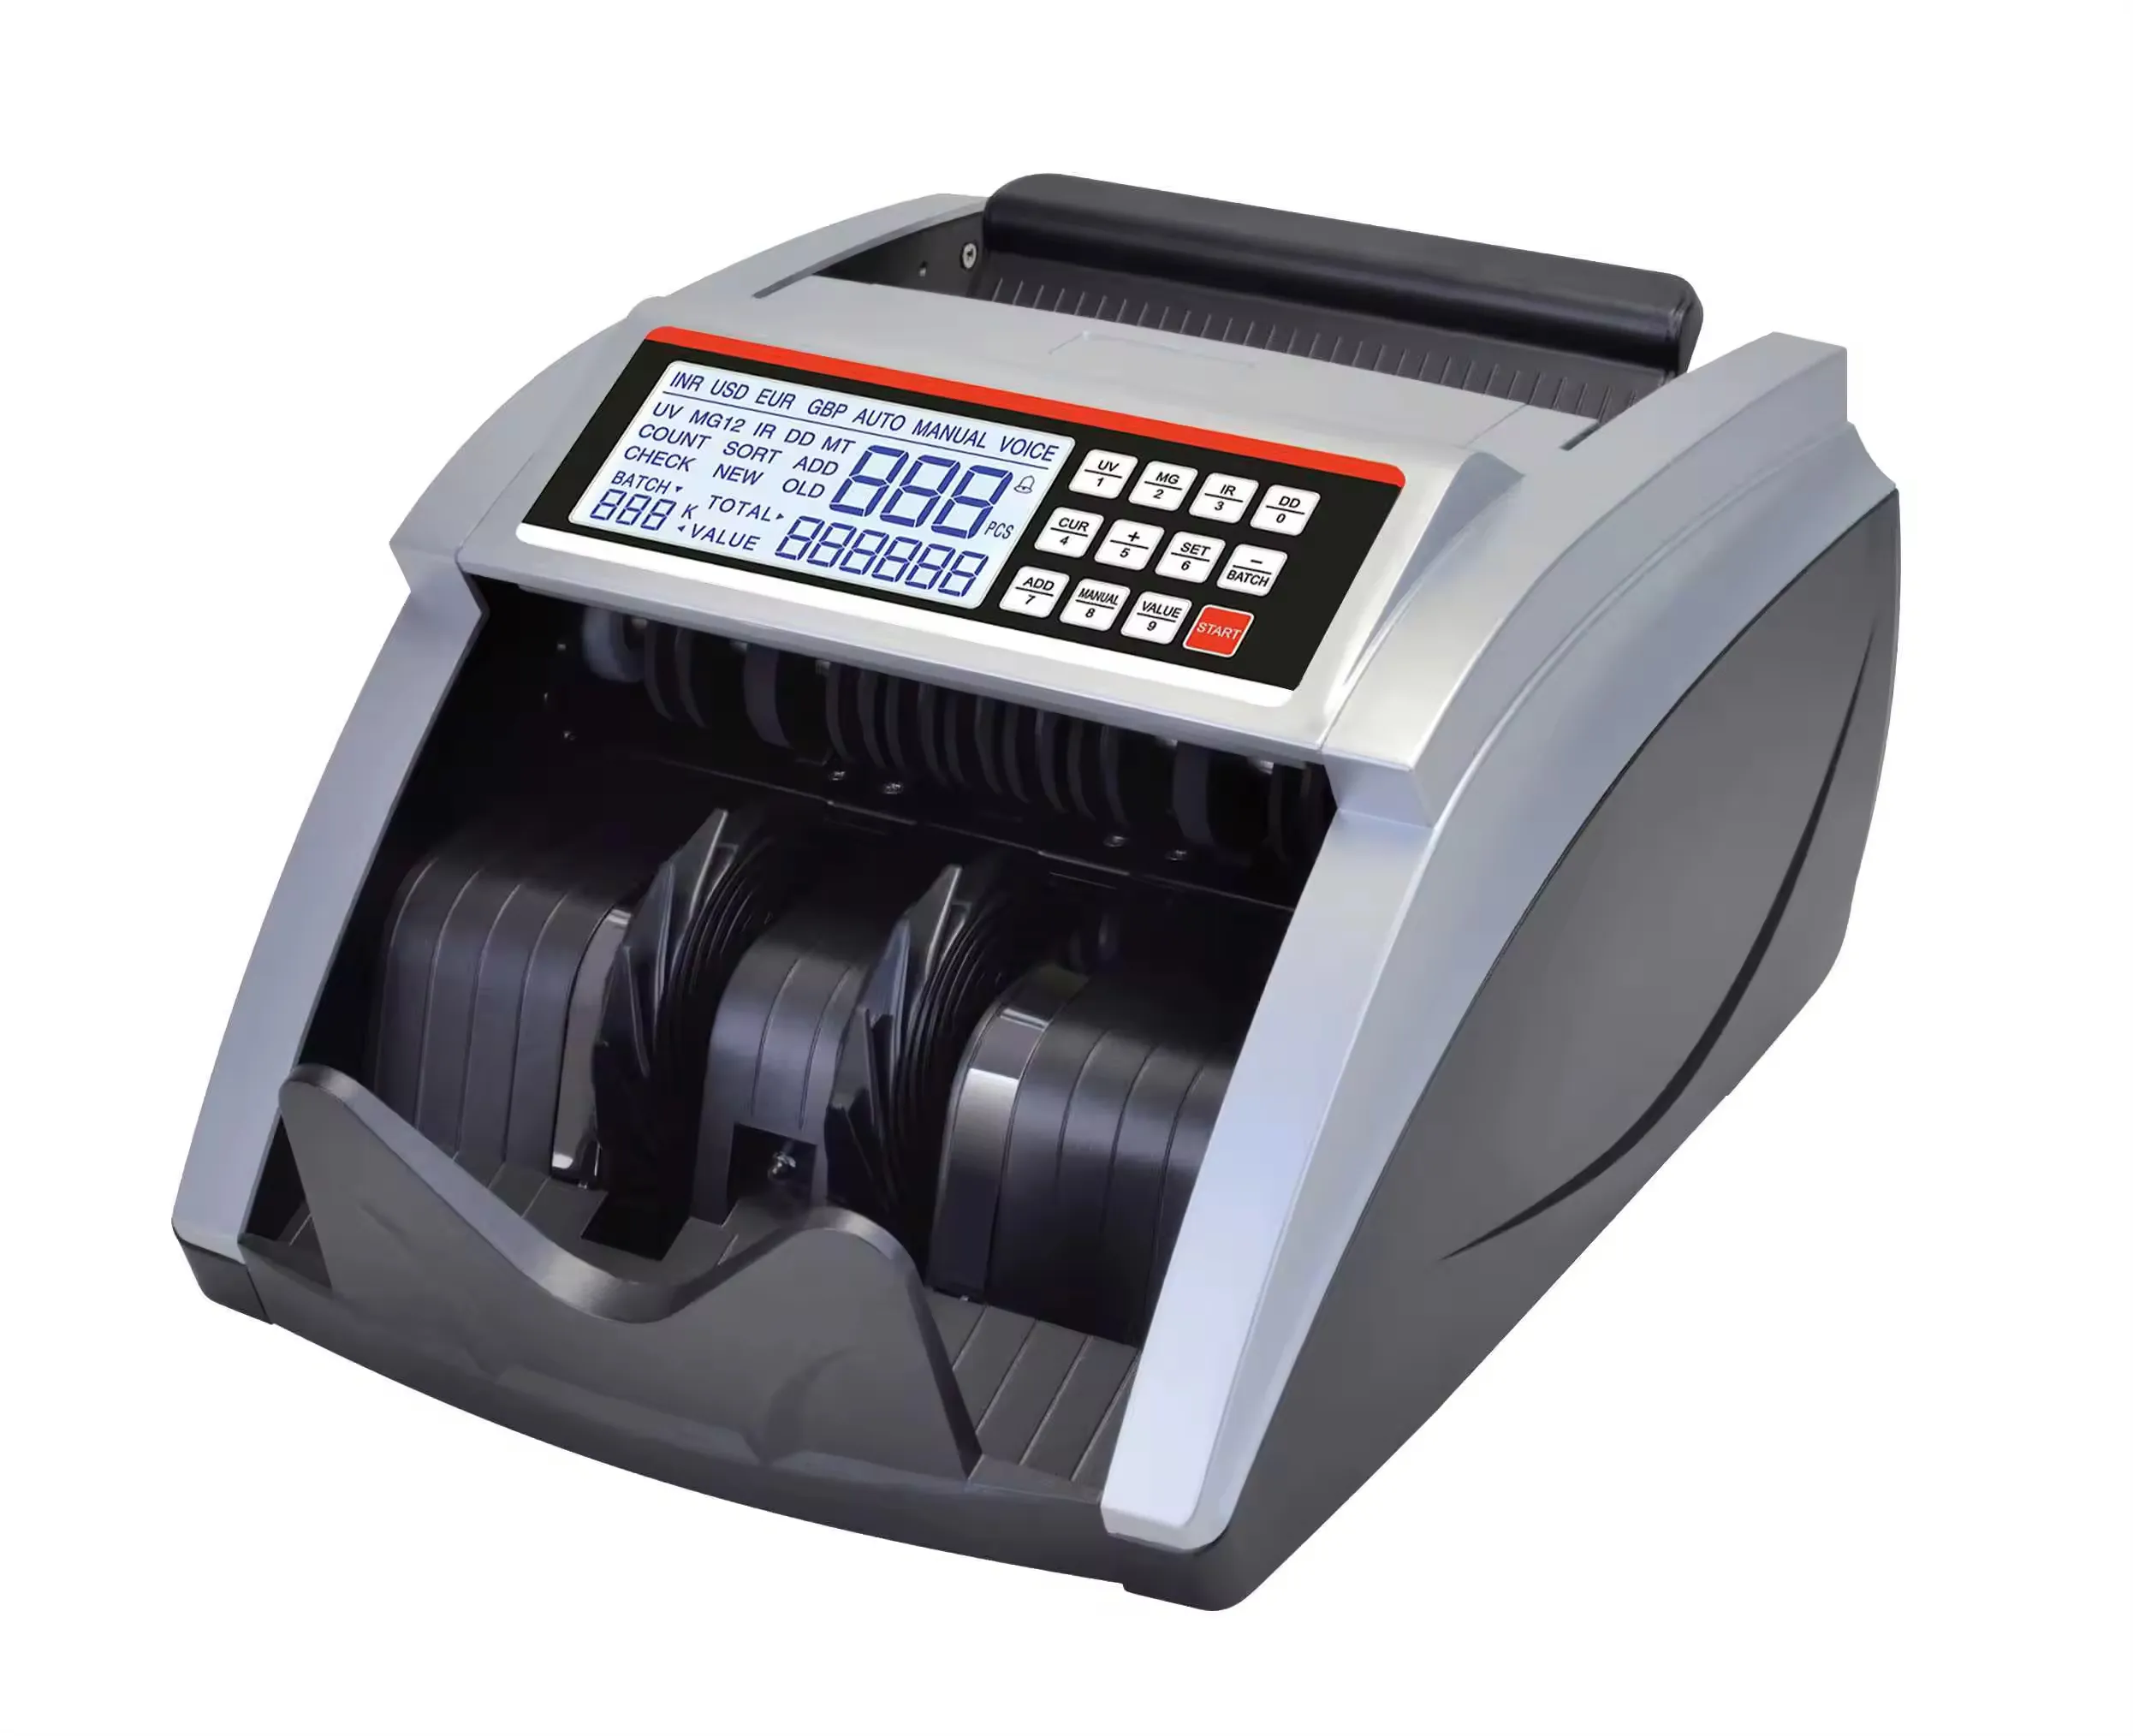 UV/MG LCD Display Bill Counter Multi-Currencies Counting Machine Cash Detector USD/EUR/IQD/TRY Money Counter